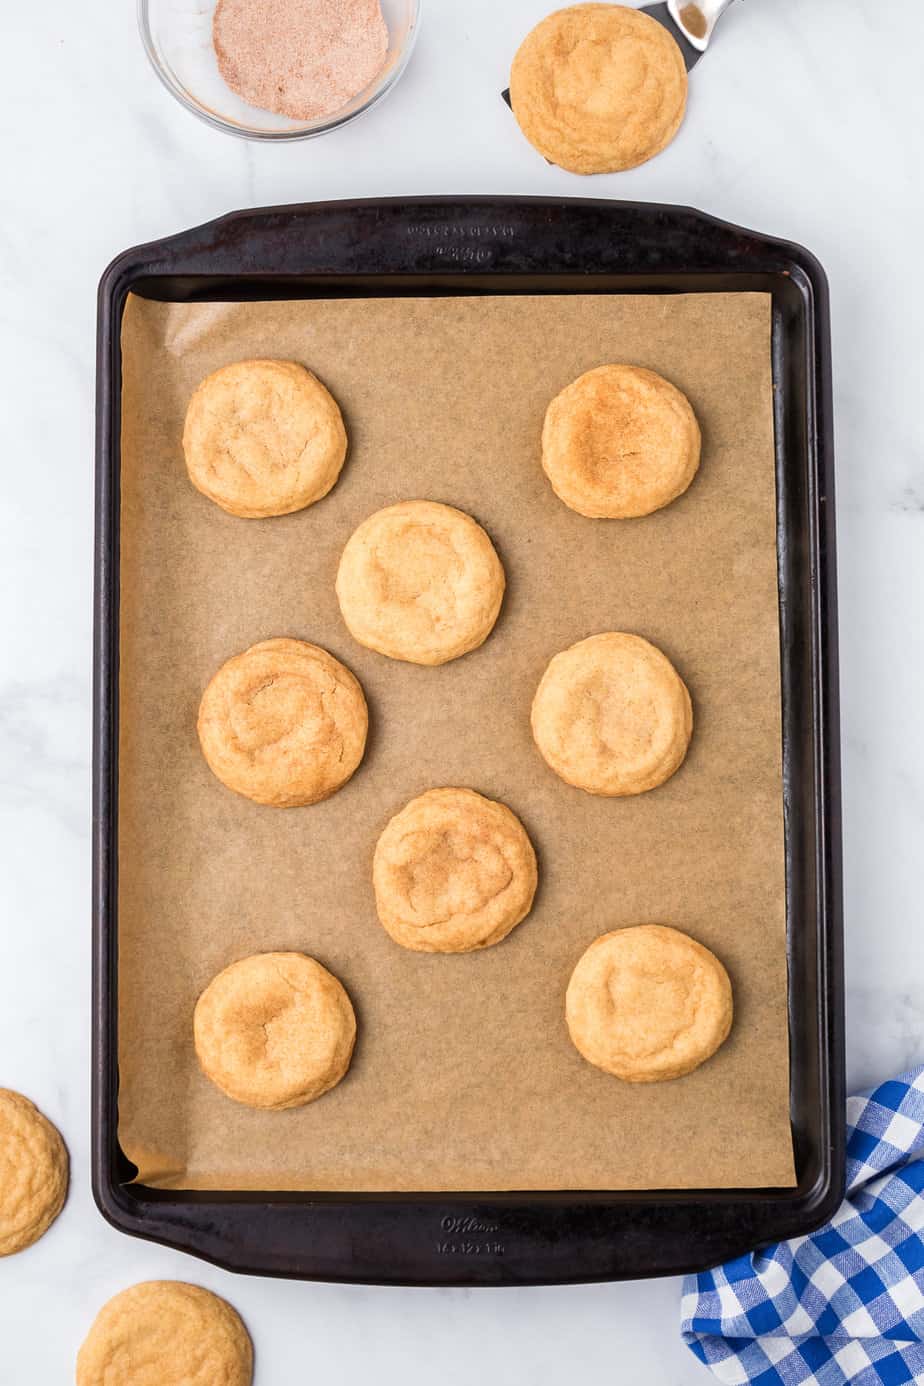 Snickerdoodle cookies baked on a pan lined with brown parchment on a counter from overhead with cinnamon sugar and a towel nearby.